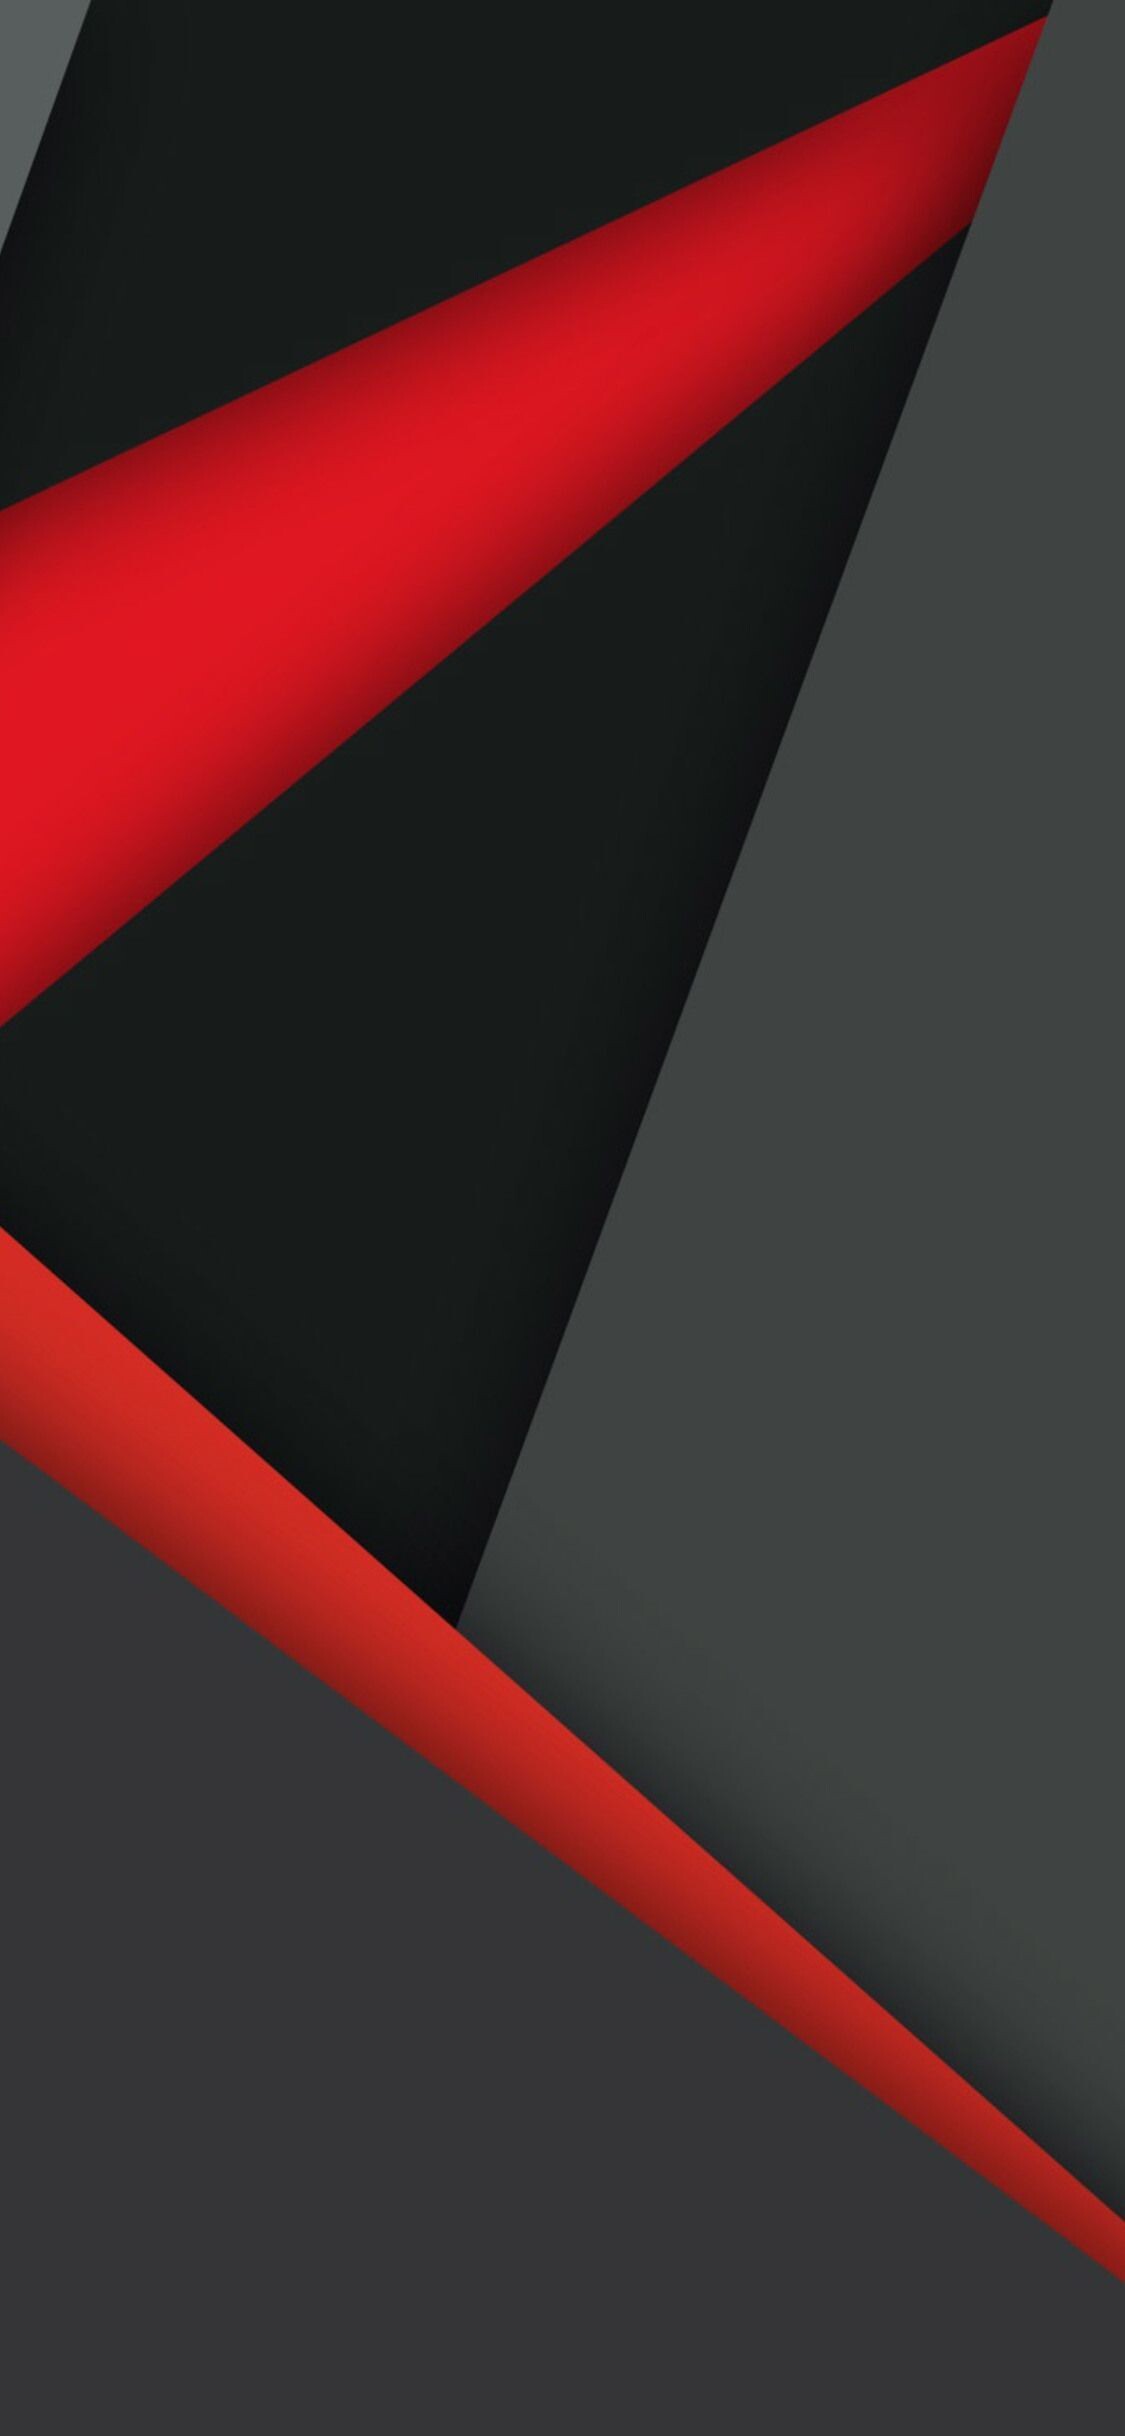 Triangle: Dark, Red and black, Abstract form, Right angle. 1130x2440 HD Wallpaper.